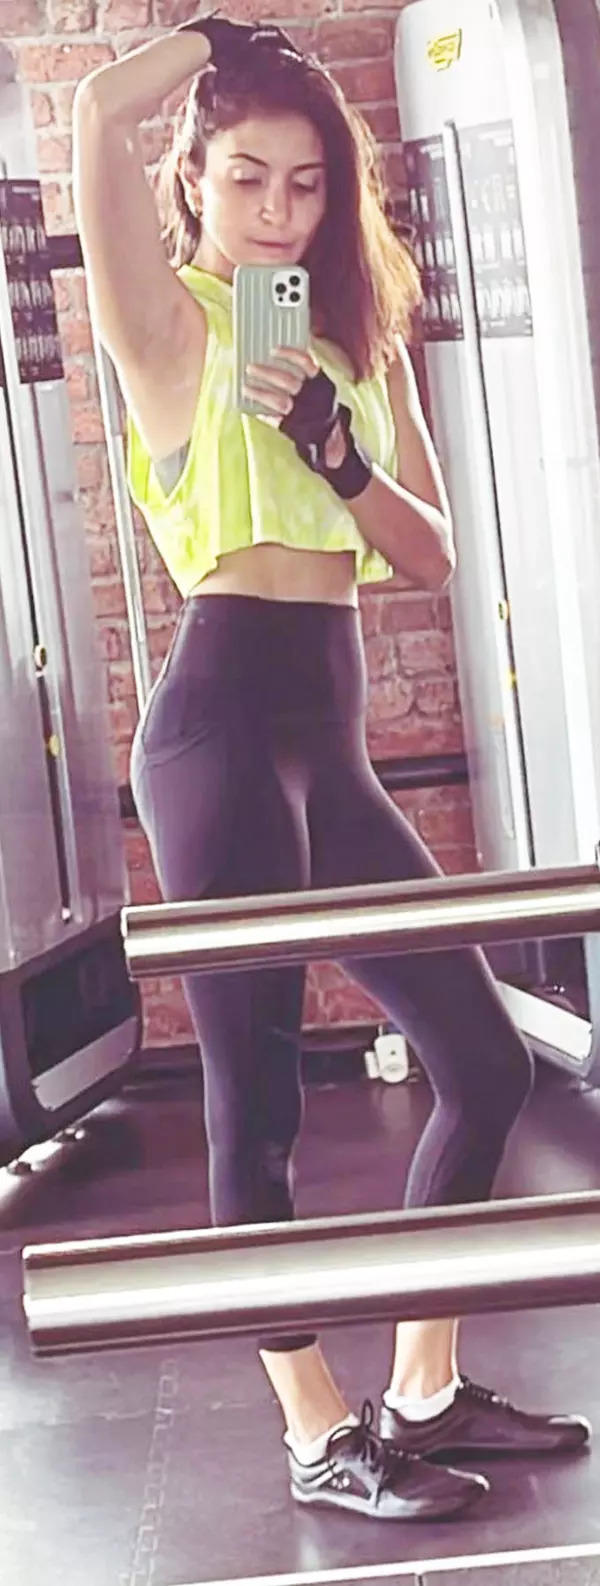 This mirror selfie of Anushka Sharma flaunting her toned physique will make you want to hit the gym!